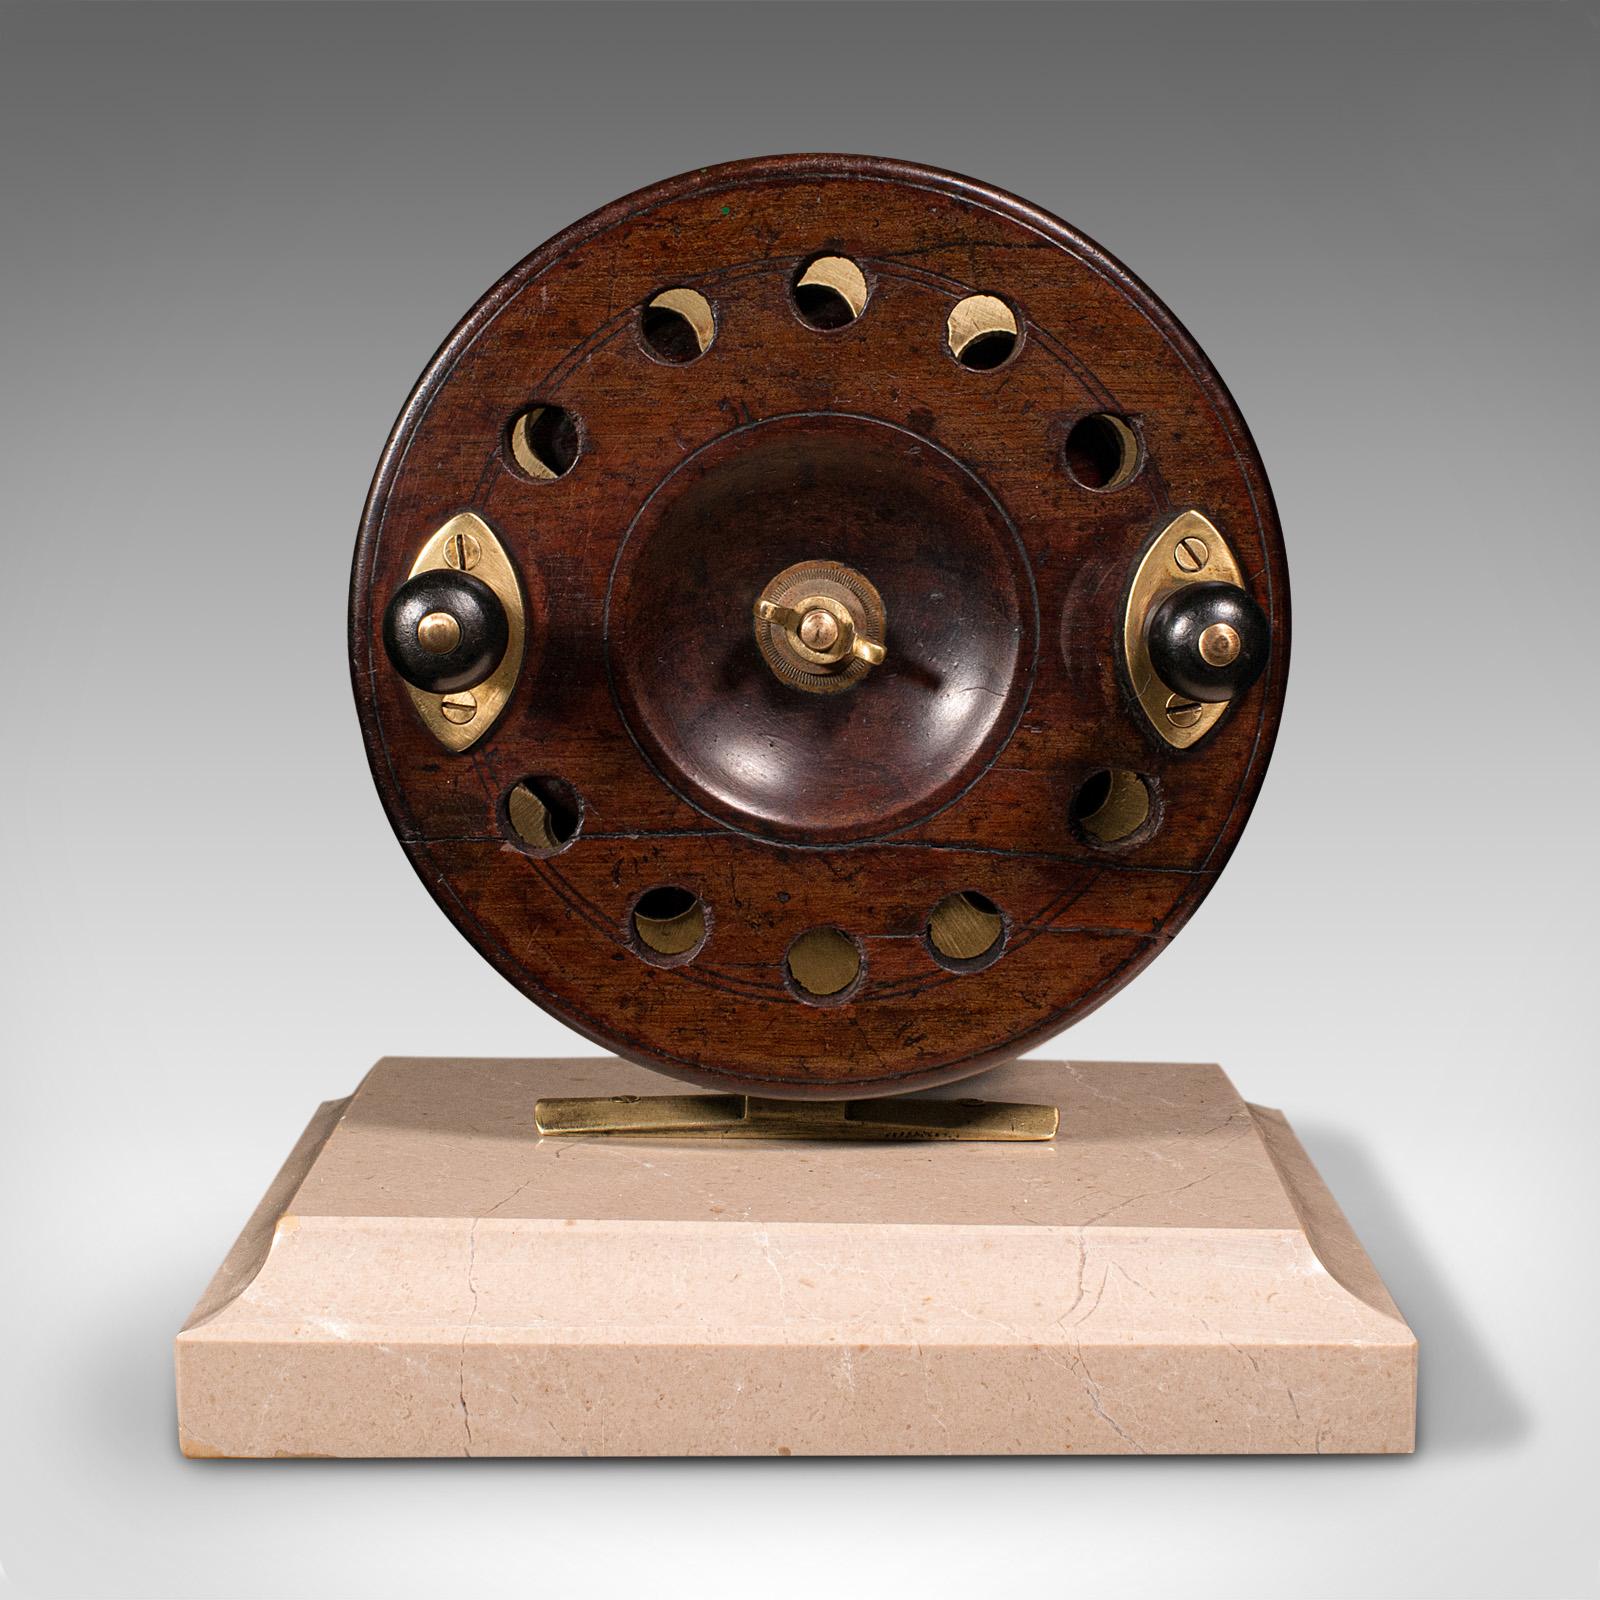 This is an antique mounted fishing reel. An English, mahogany and brass reel of sporting decorative interest and mounted on a travertine base, dating to the late Victorian period and later, circa 1900.

Of great appeal to the keen fisherman for